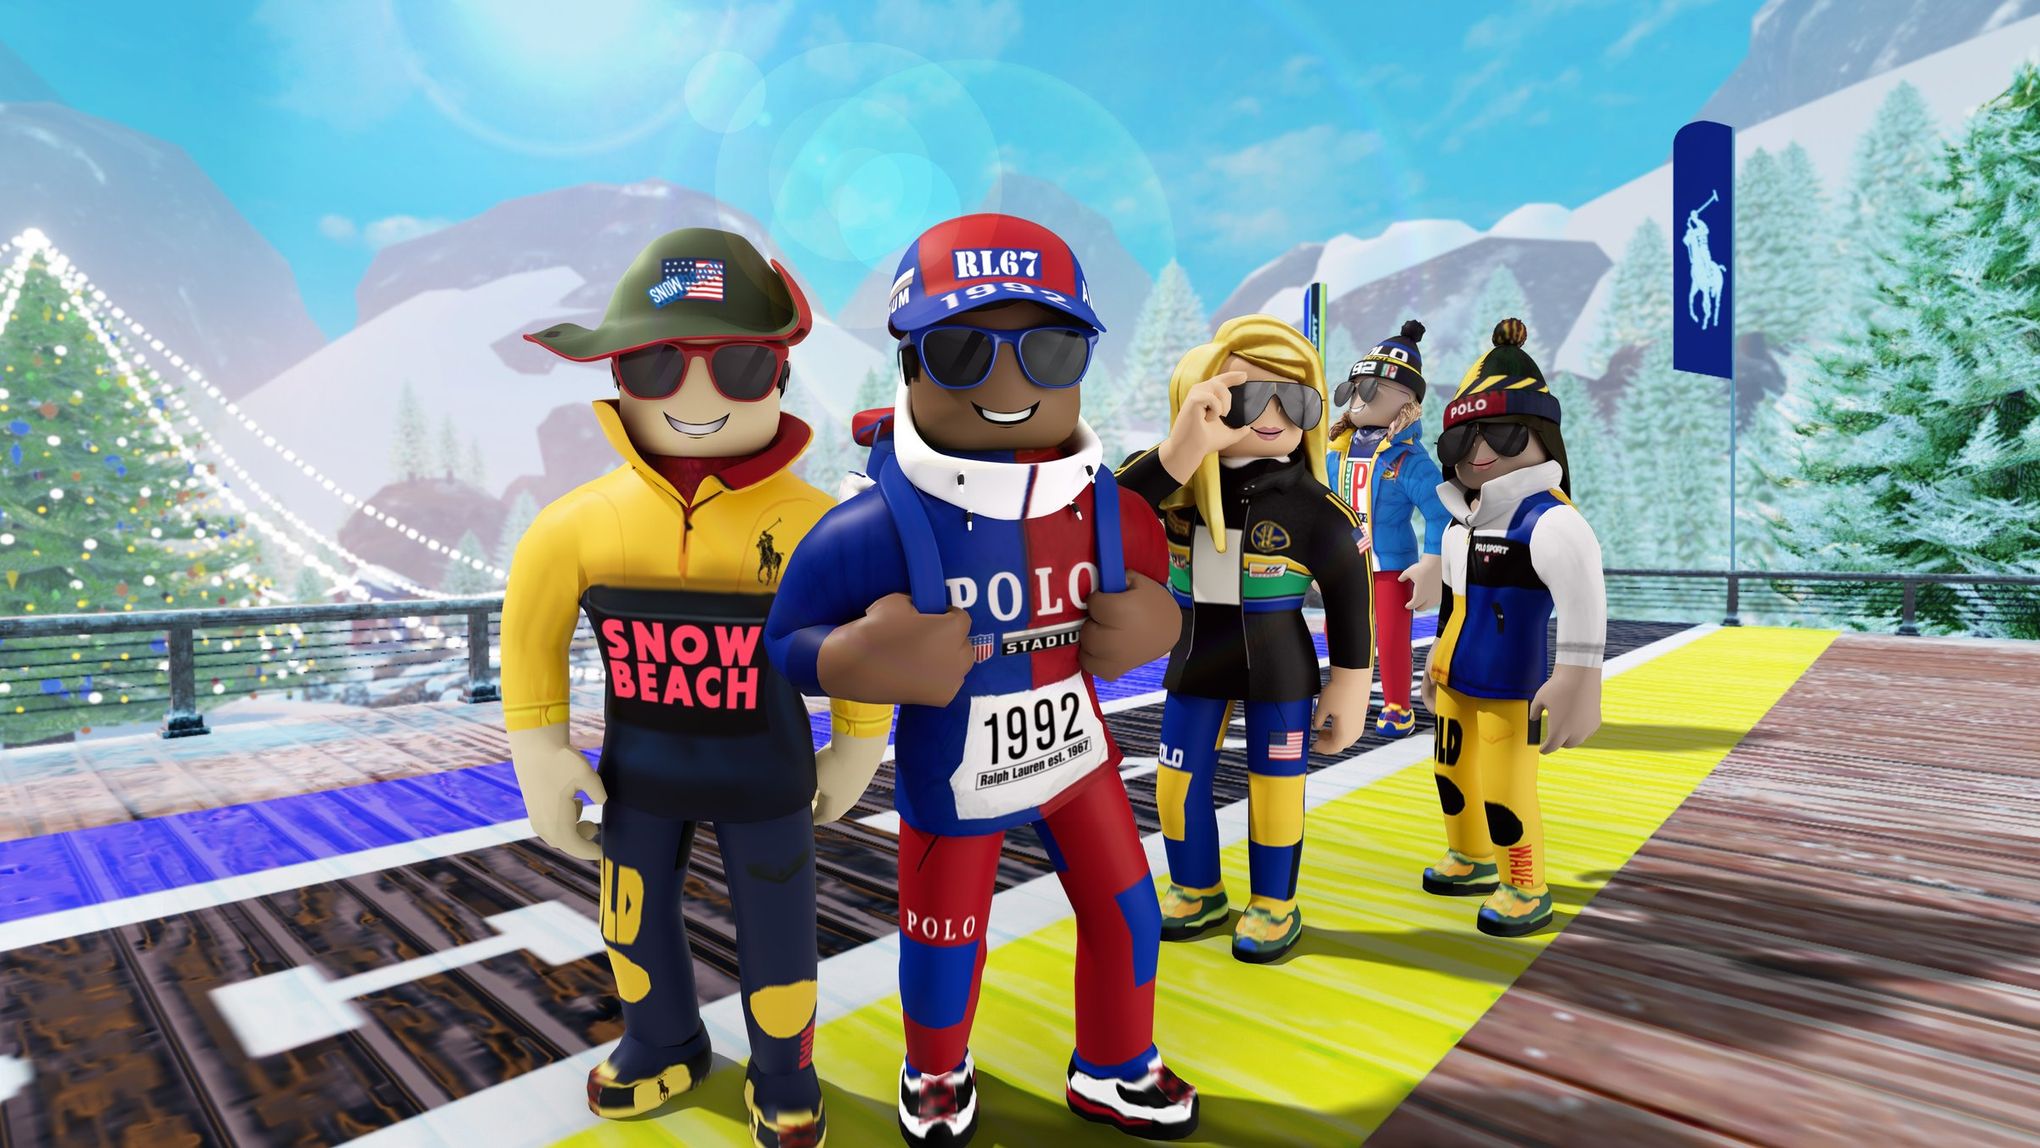 Outfits Under 10 Robux, Icy Roblox